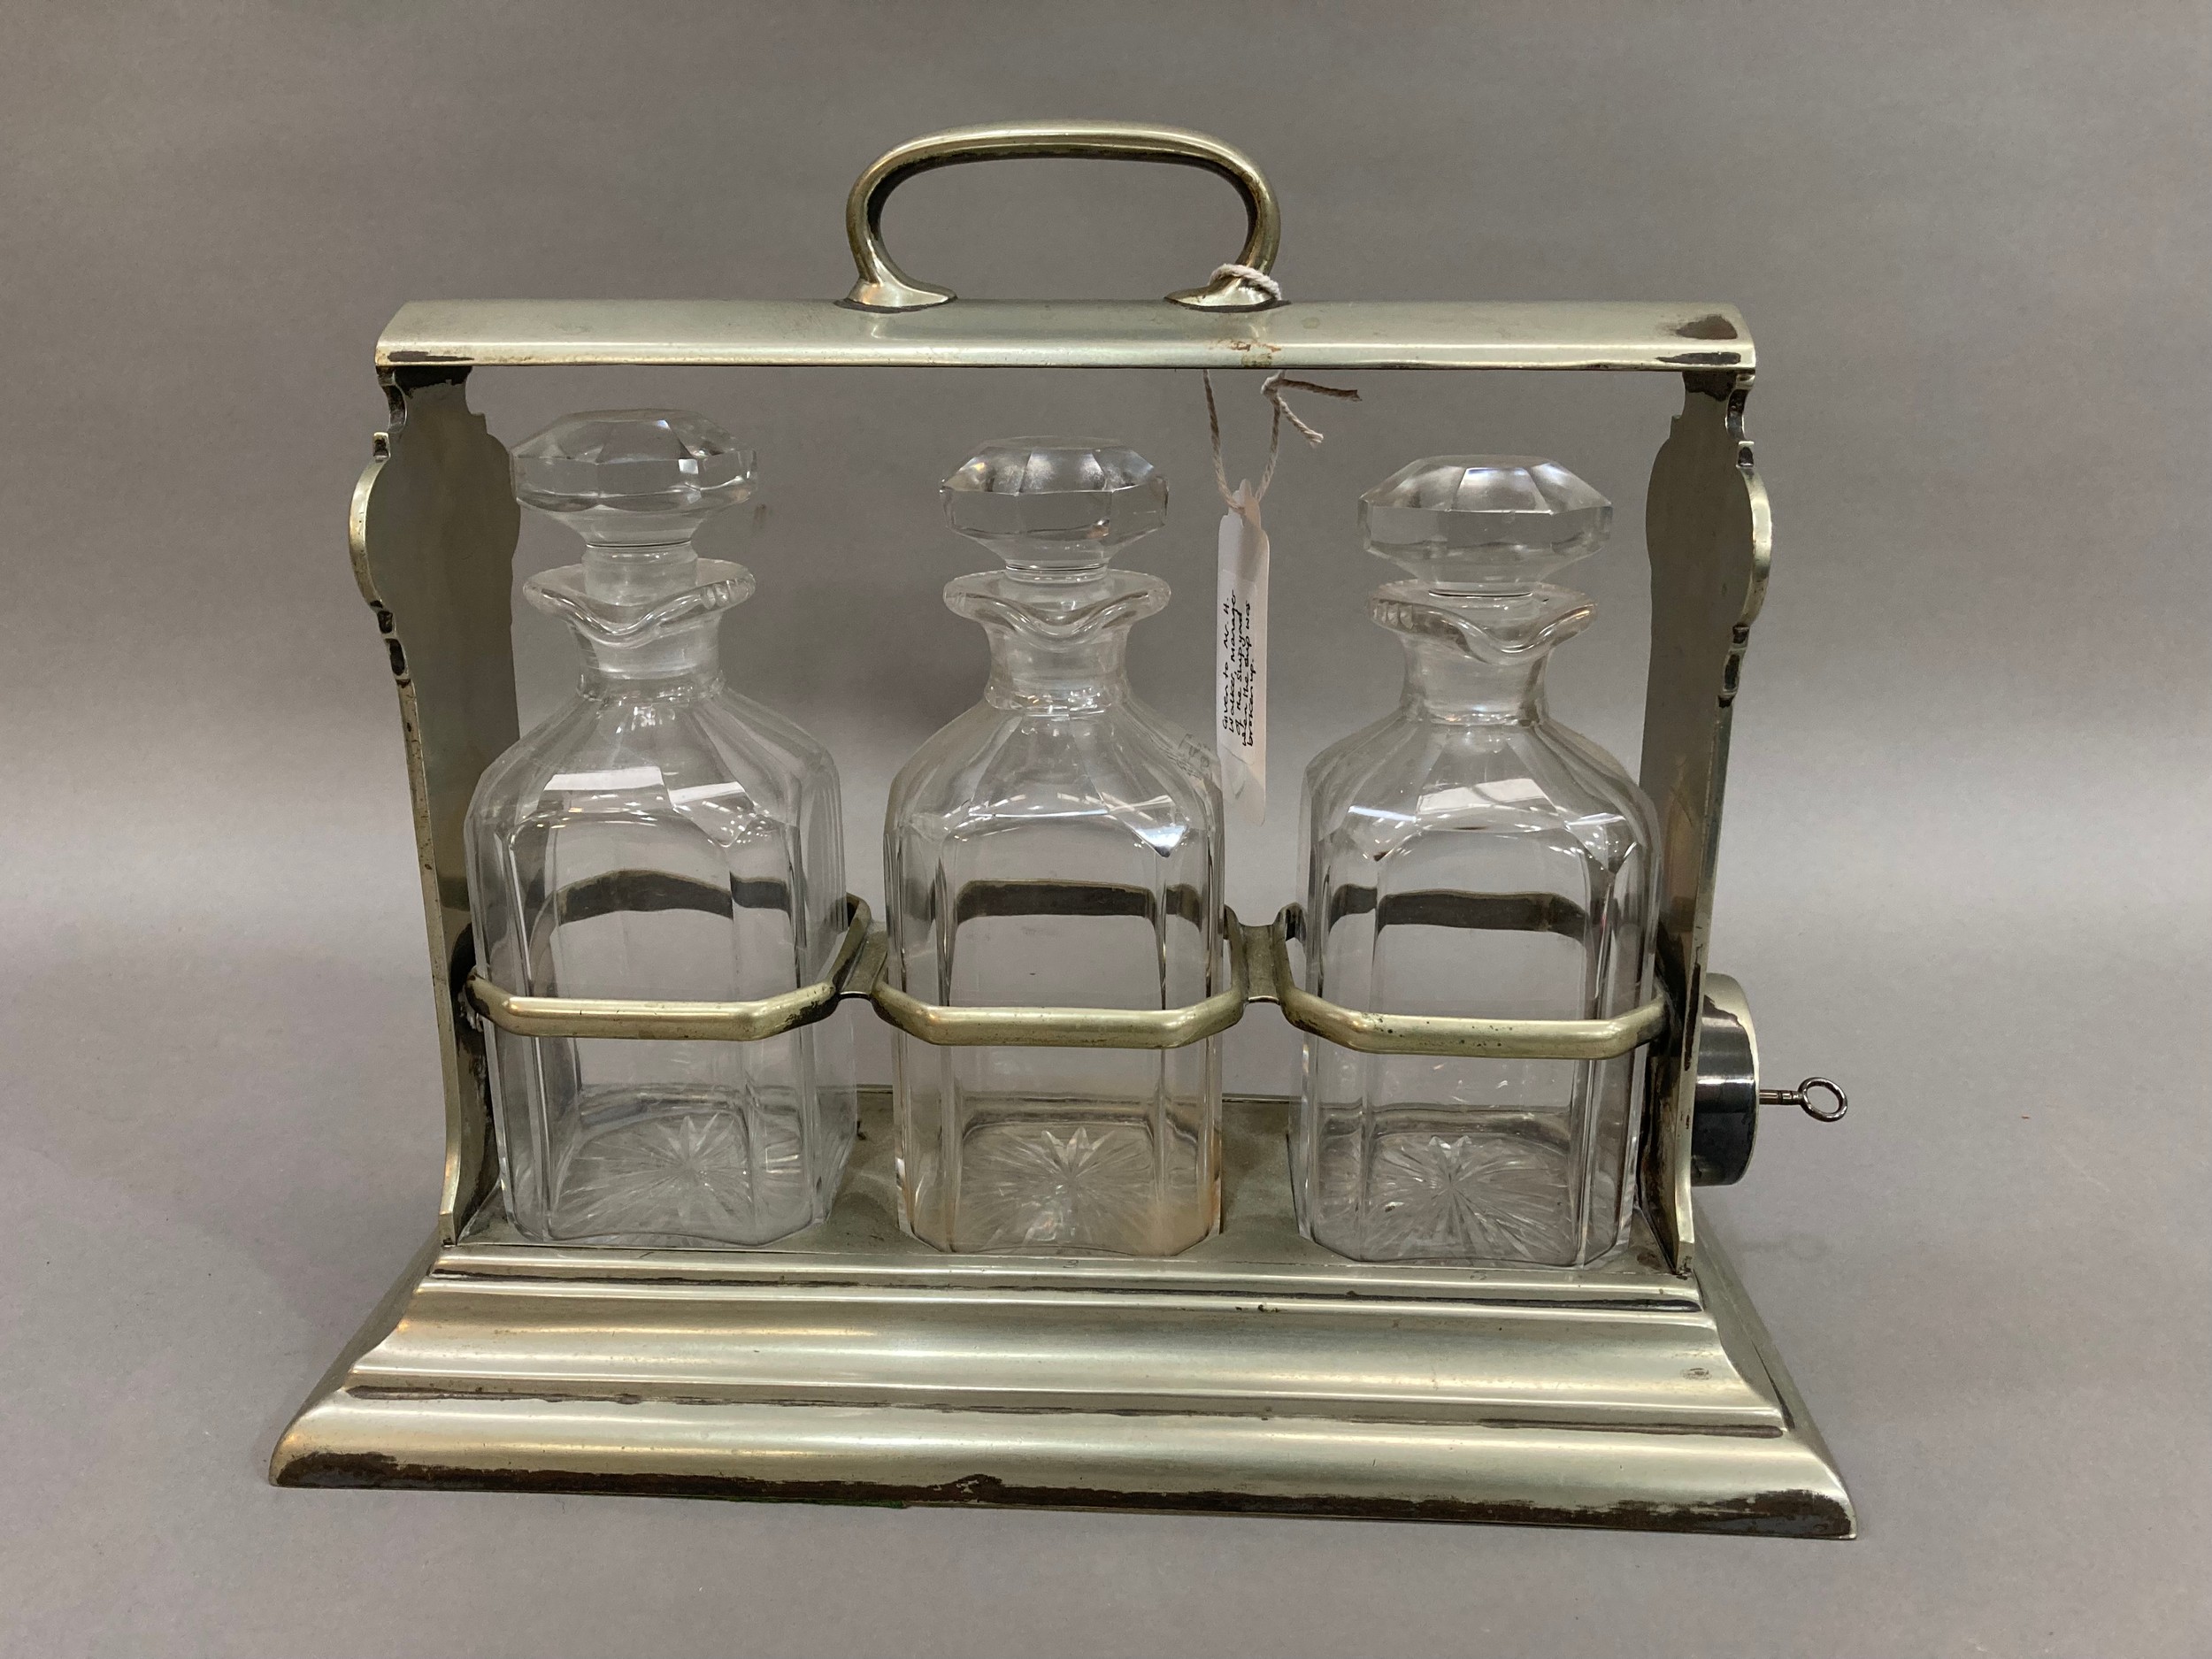 A silver plated tantalus fitted with three glass decanters of square outline from R M S Berengaria